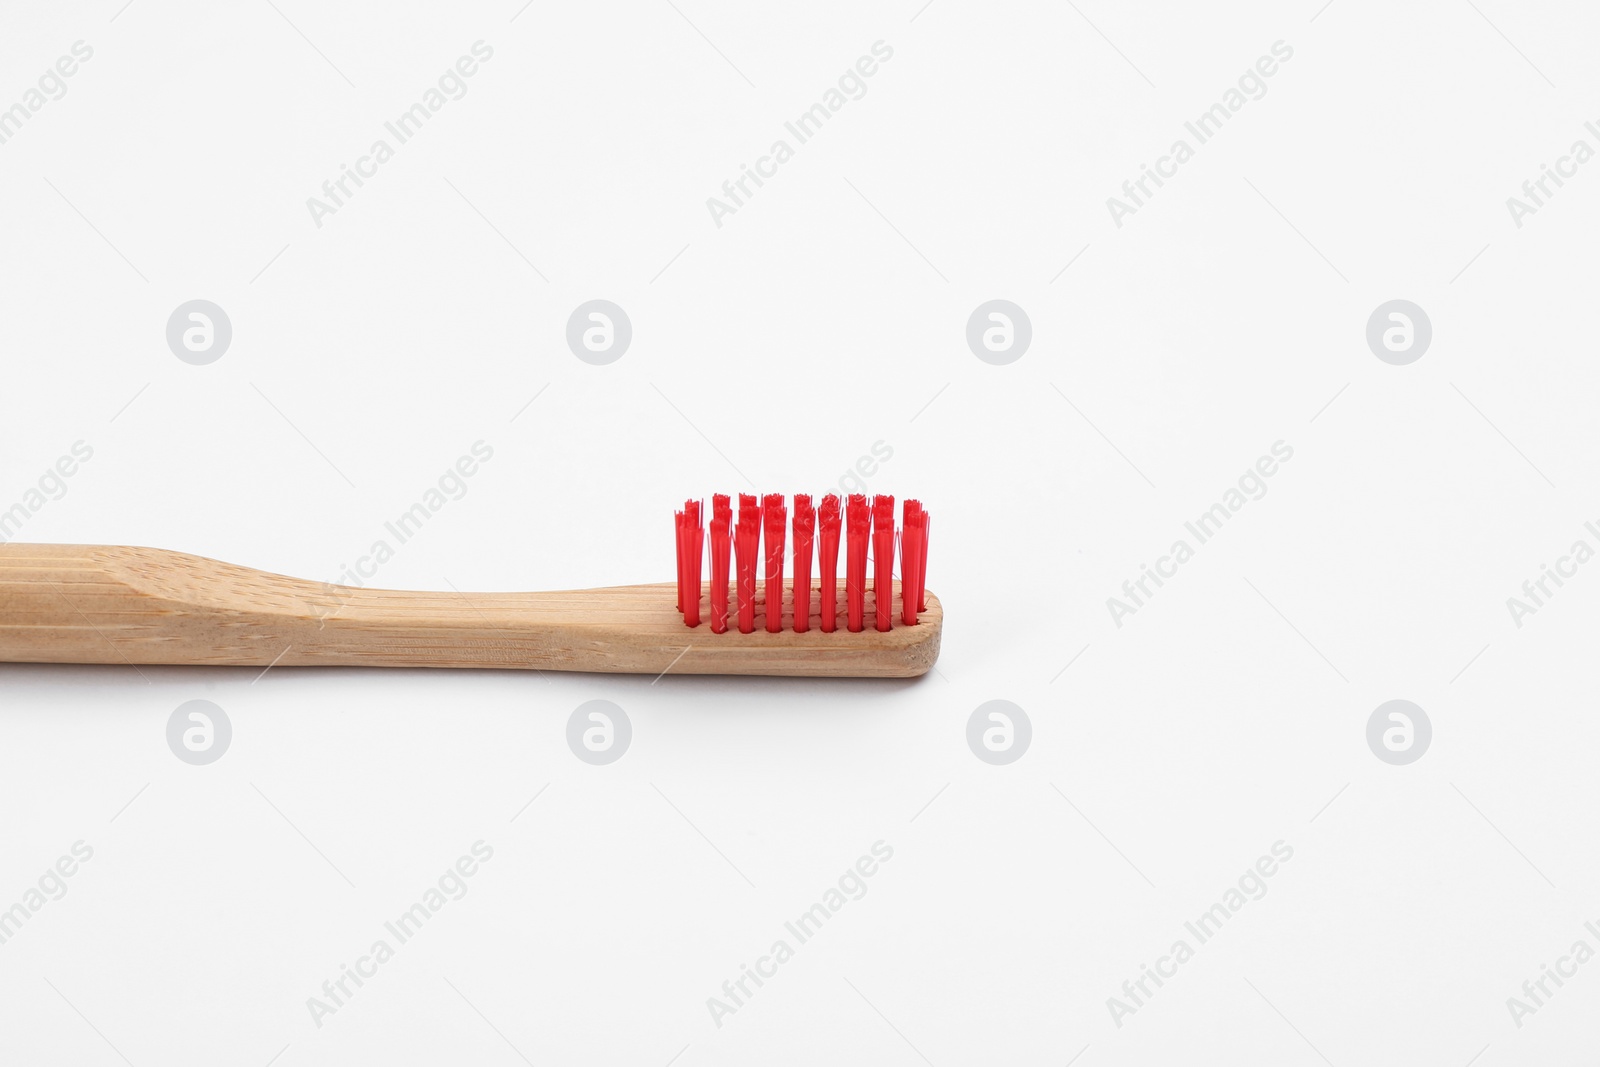 Photo of Bamboo toothbrush with red bristle isolated on white